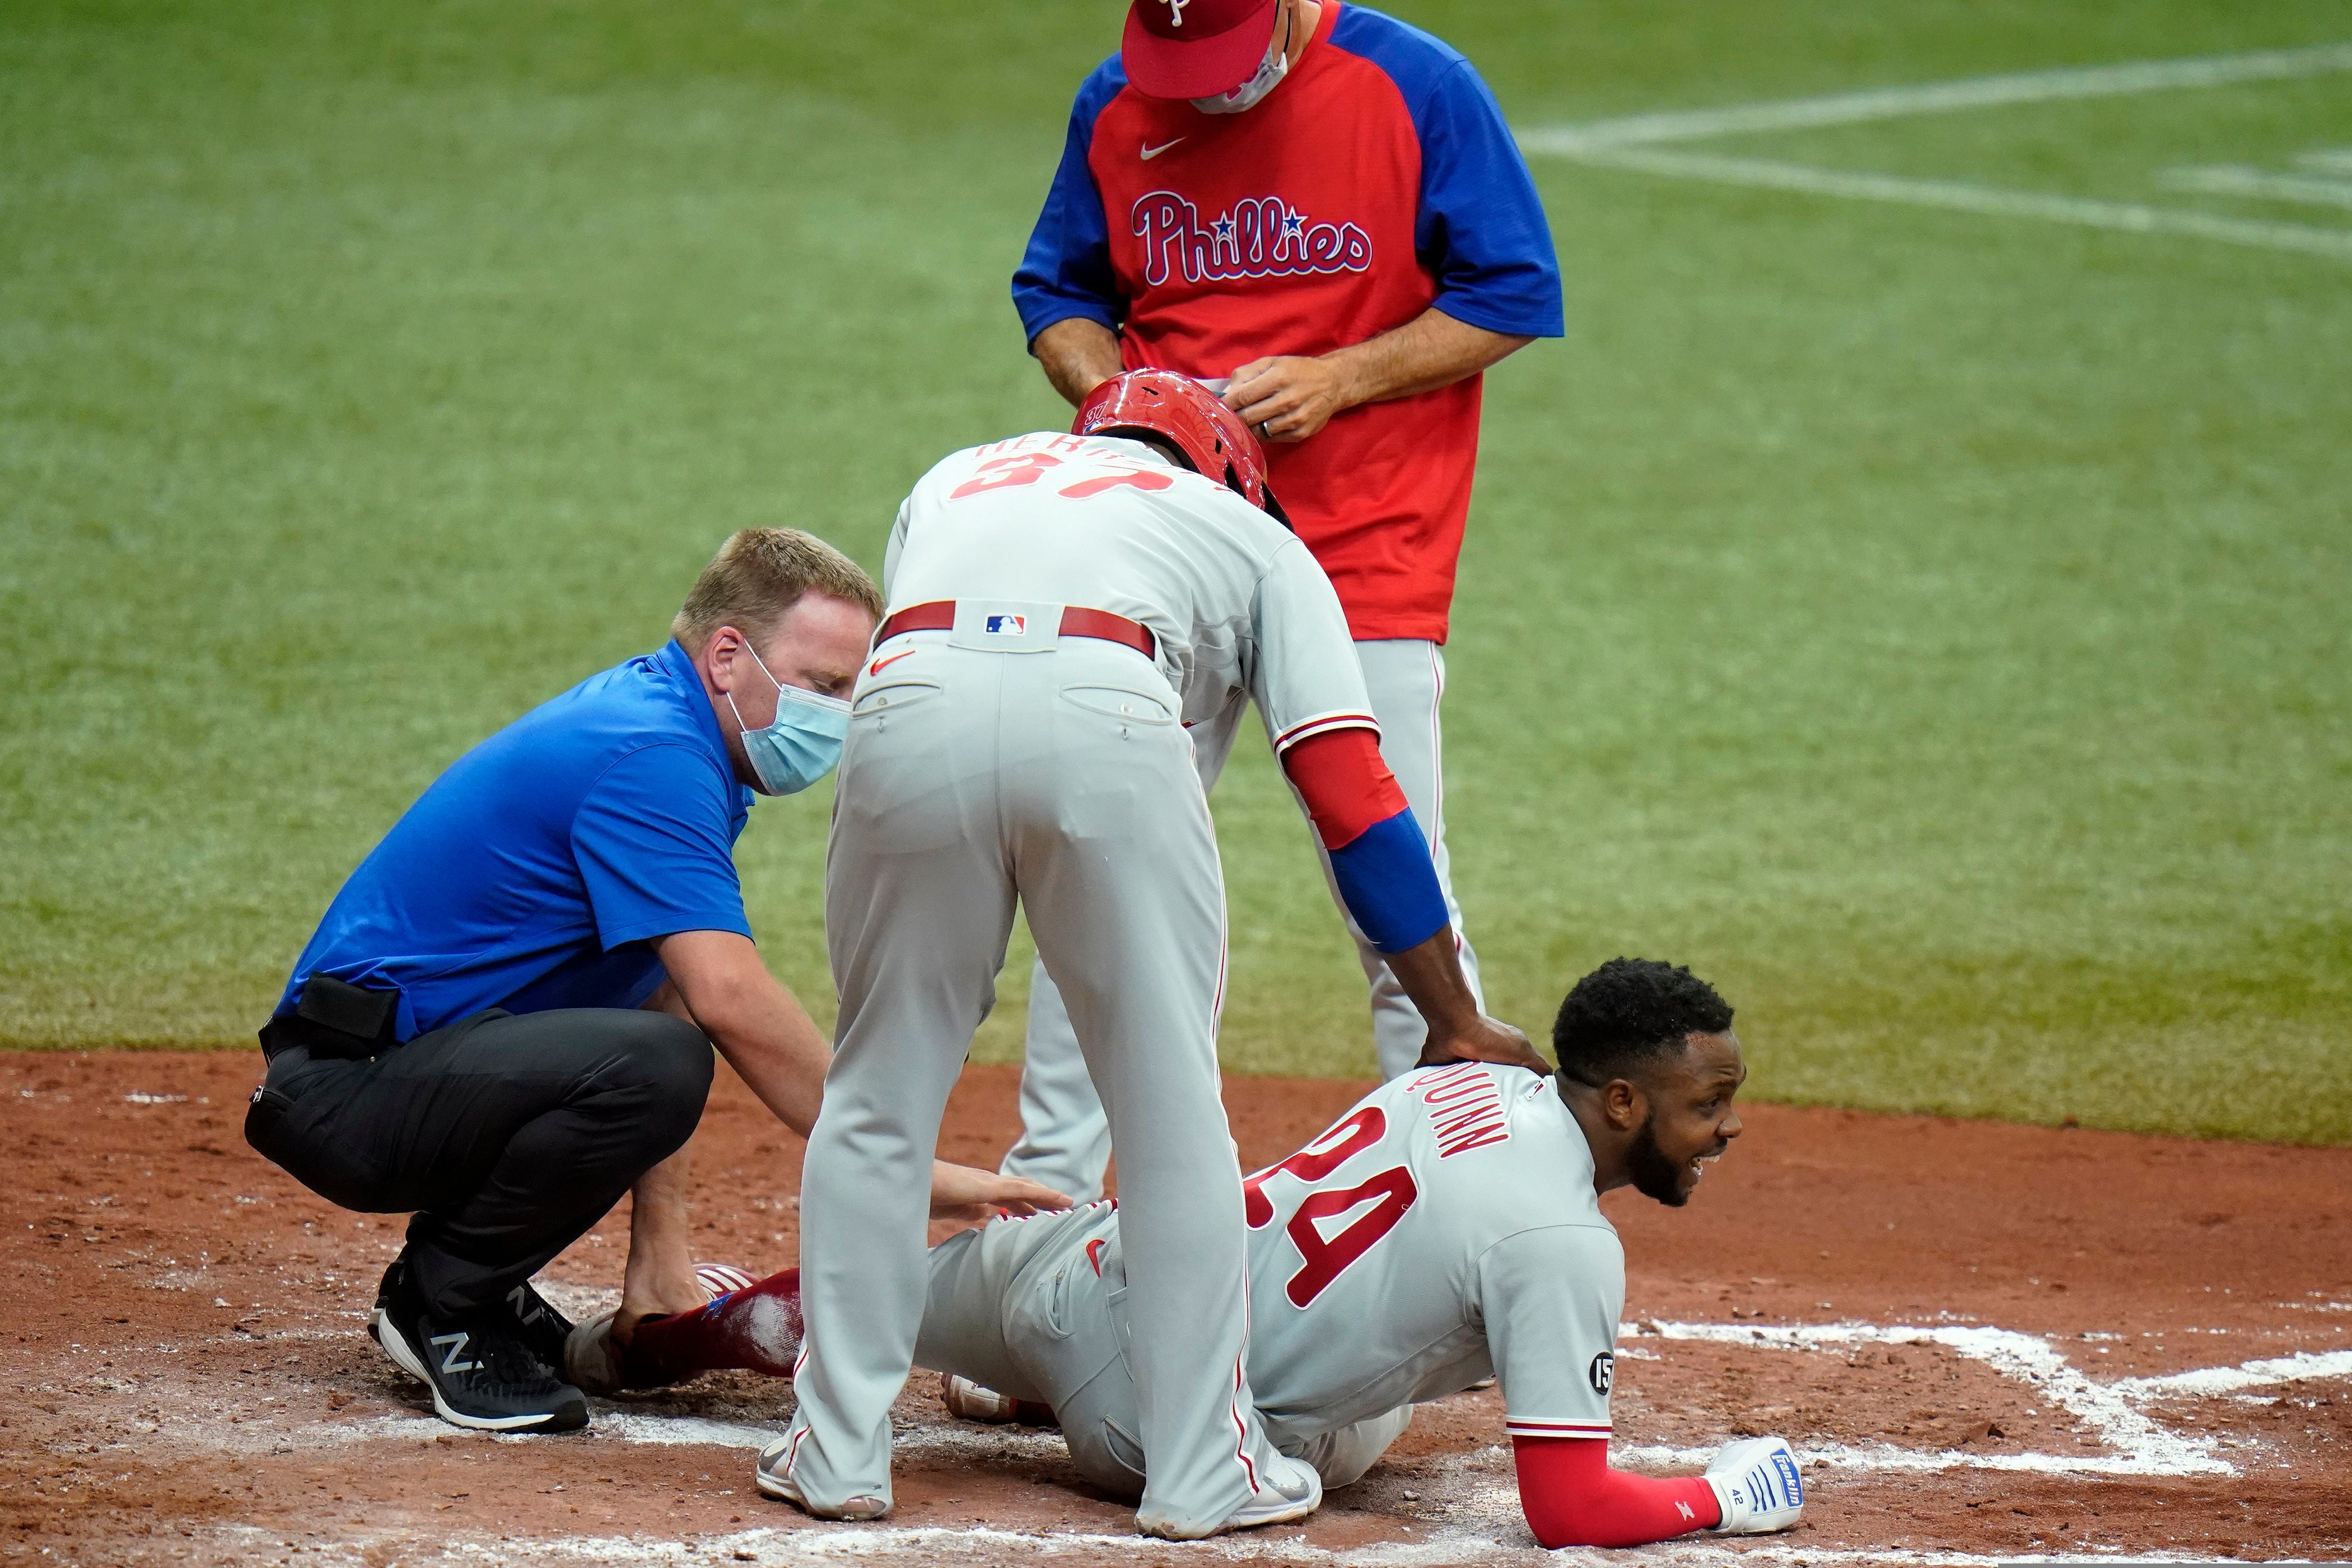 Phillies' Roman Quinn to undergo Achilles surgery later this week